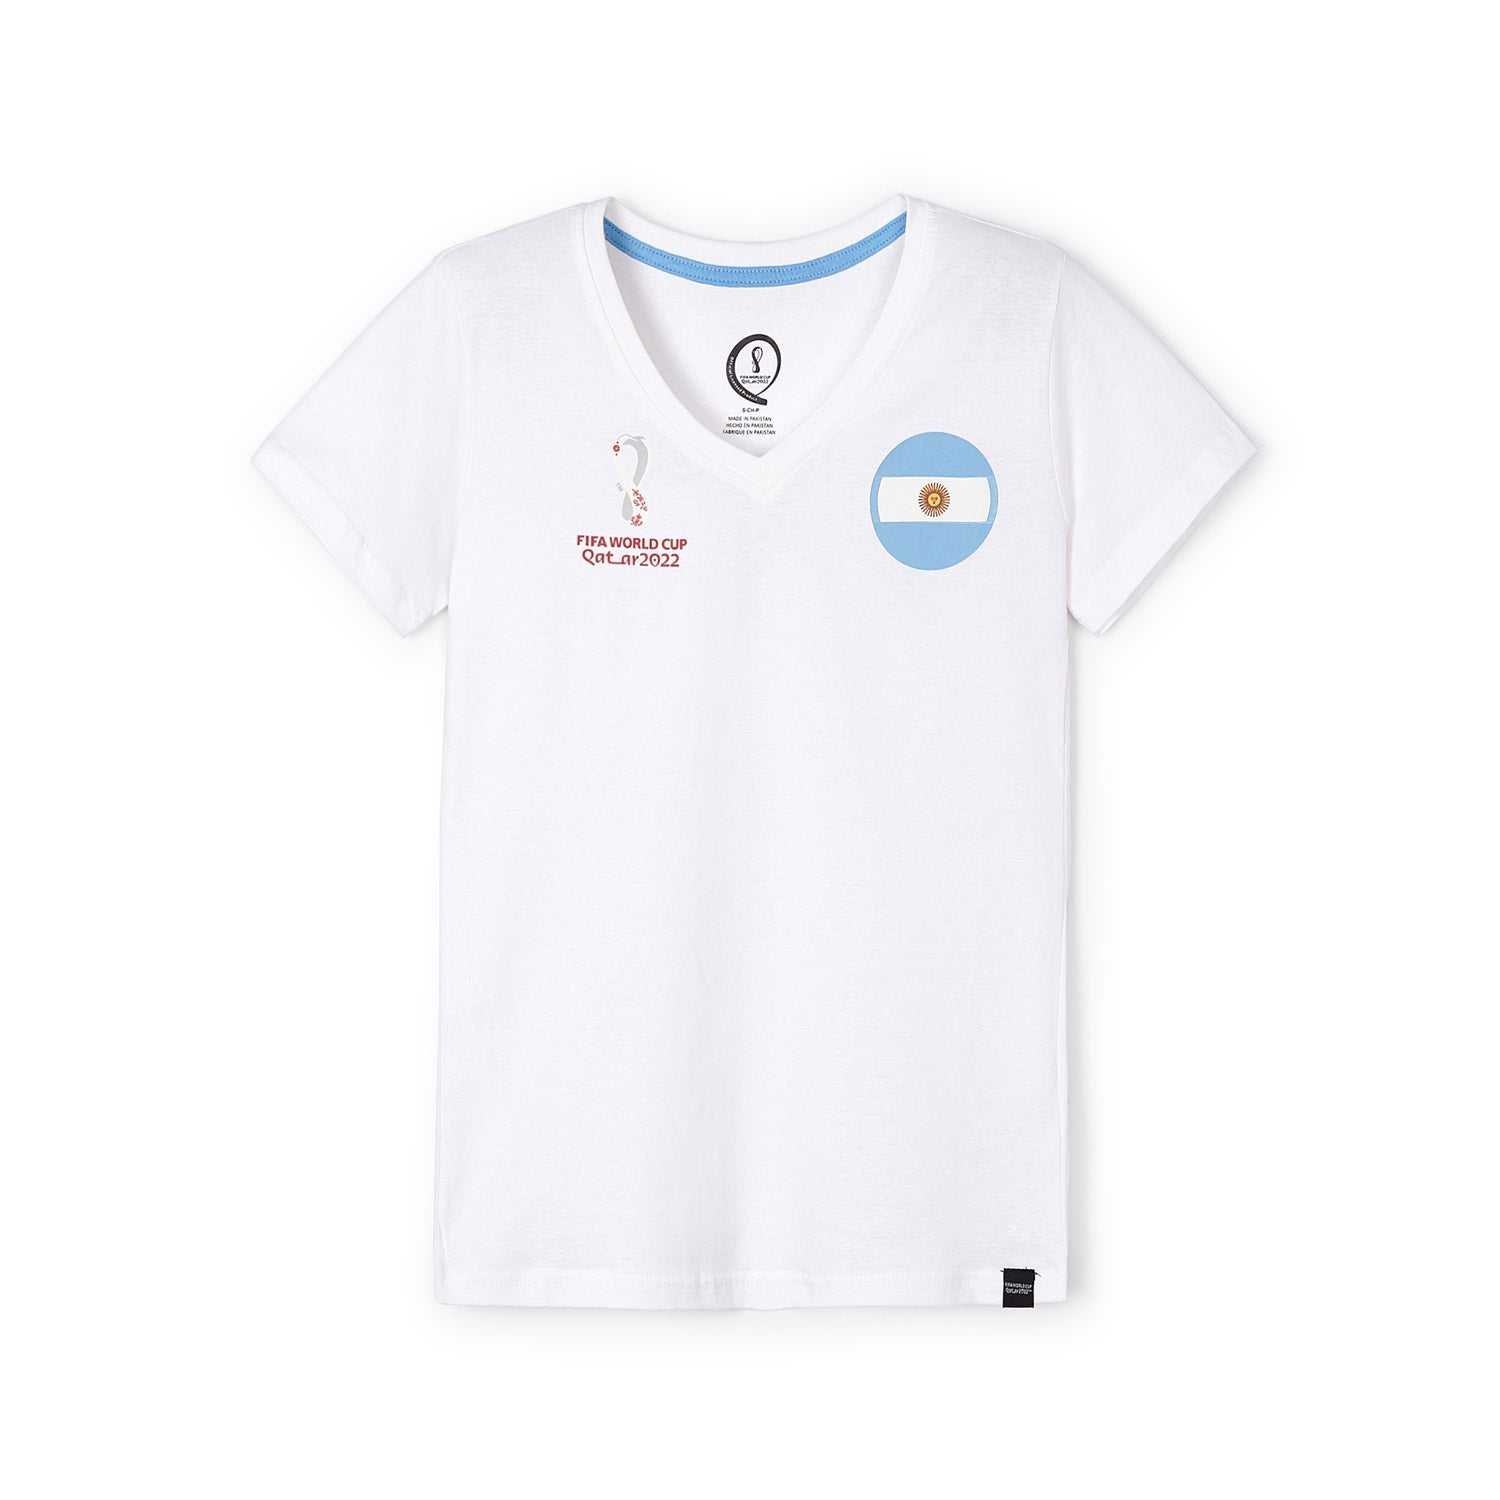 2022 World Cup Argentina White T-Shirt - Womens